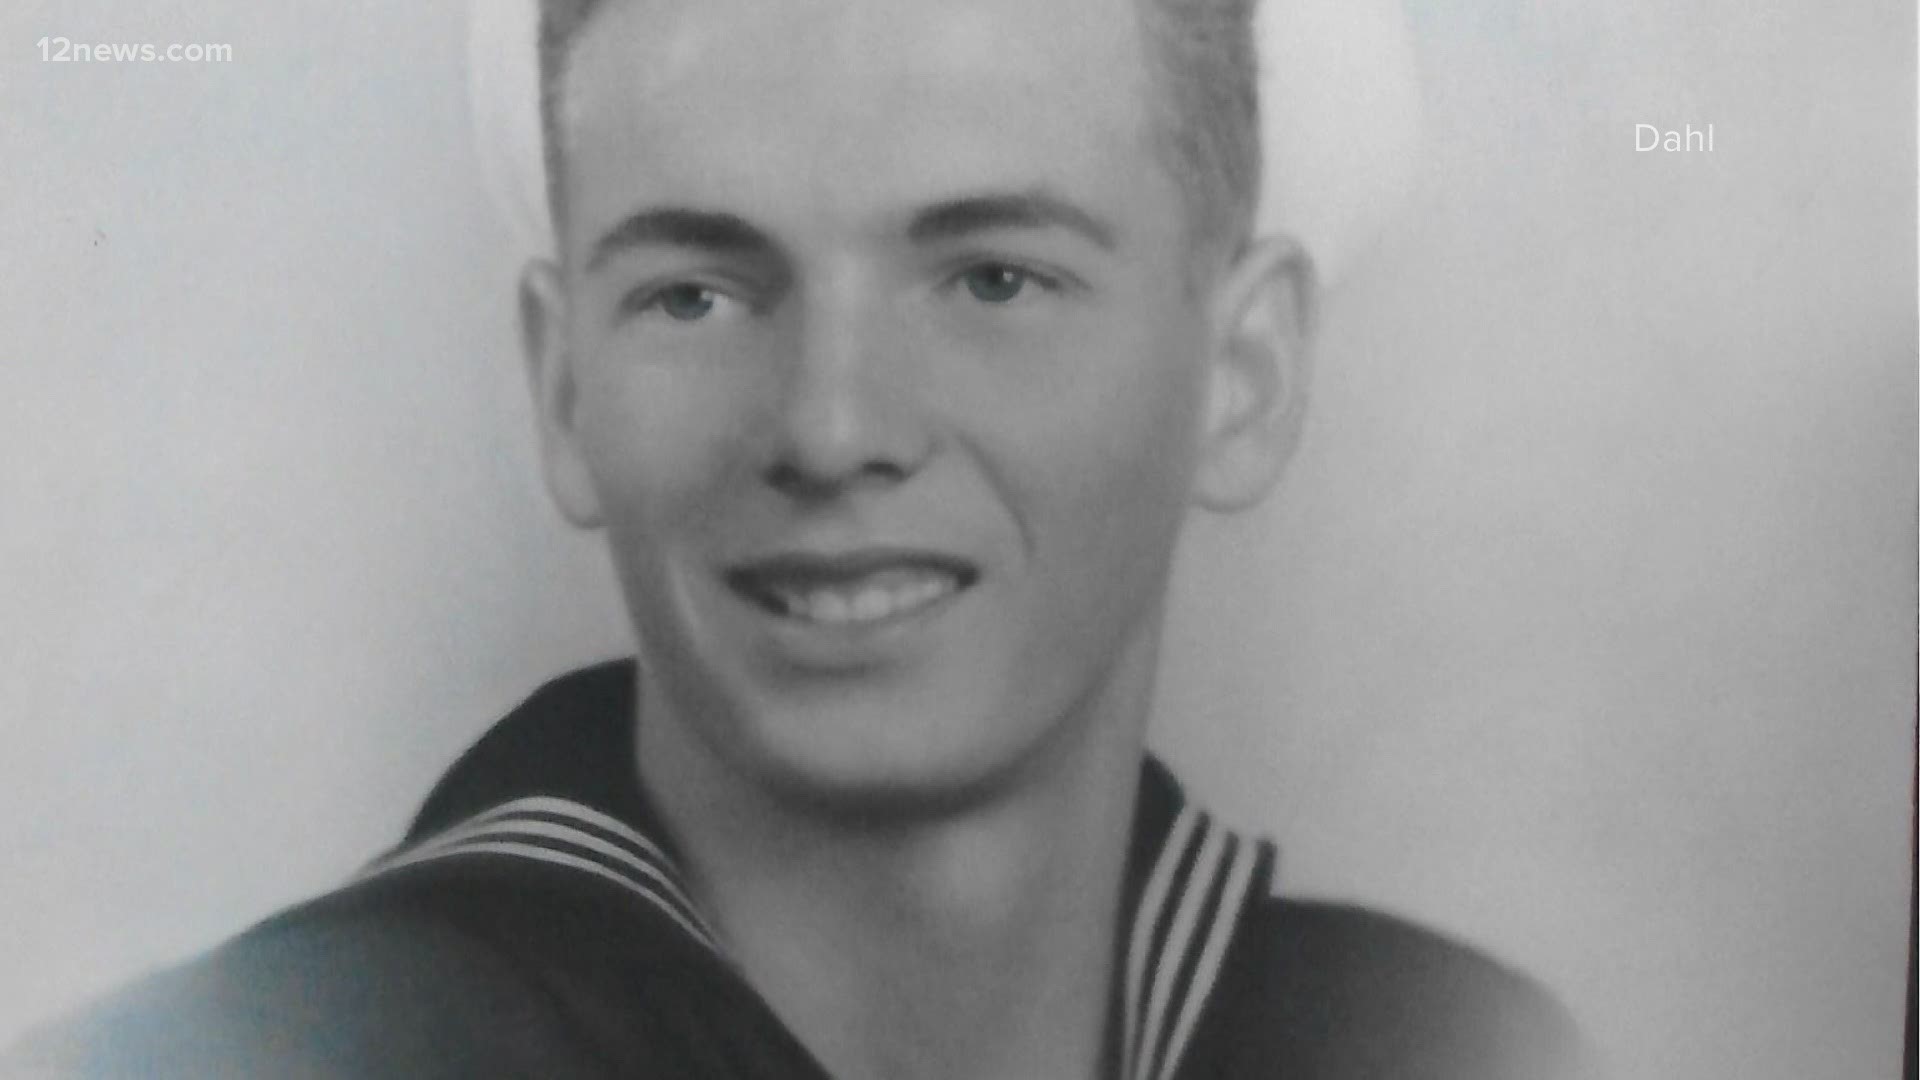 After nearly 80 years, Navy Seaman 1st Class Carl S. Johnson is returning home to Arizona. The seaman was killed in the attack on Pearl Harbor in December of 1941.